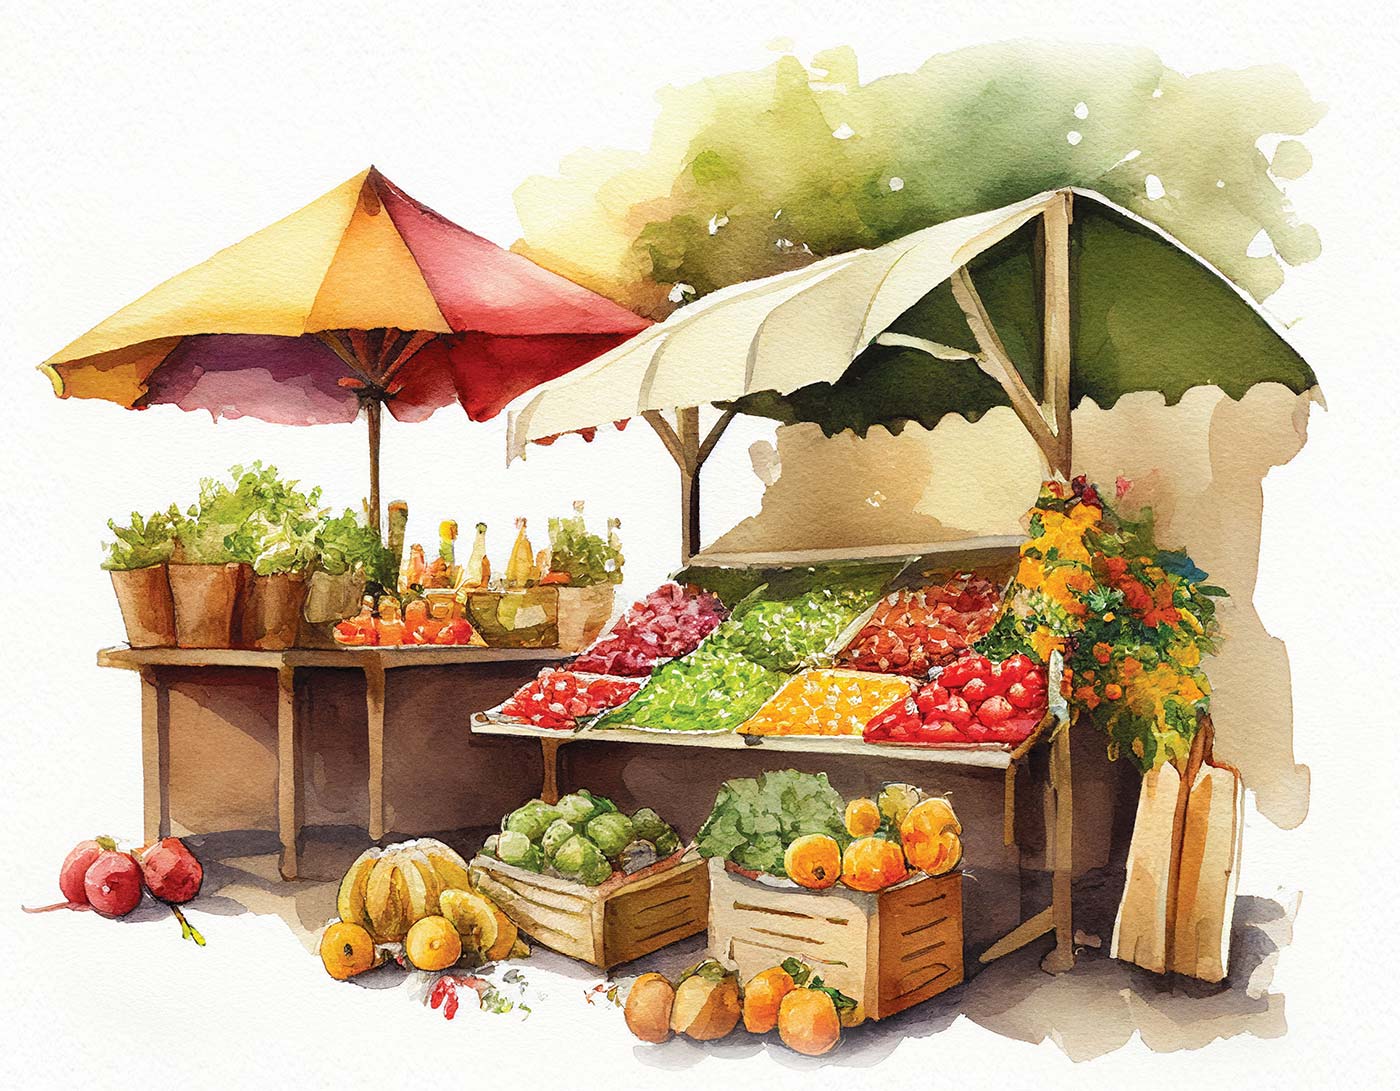 booth at a farmers market illustration